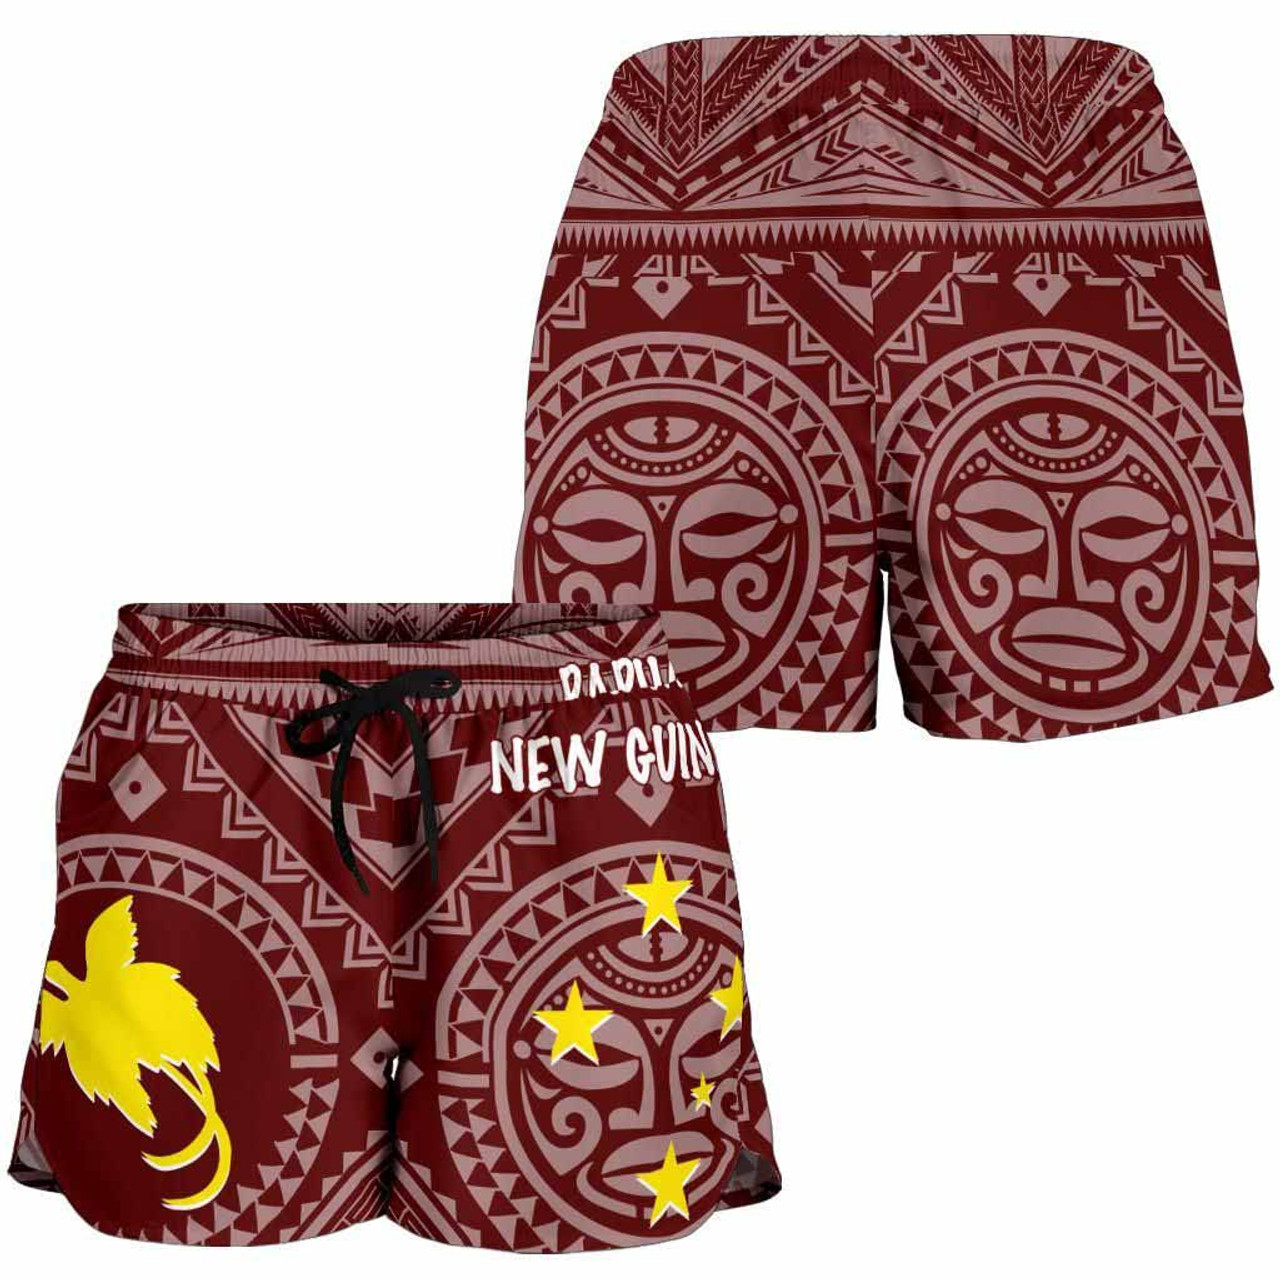 Papua New Guinea Women Shorts - Flag With Polynesian Patterns (Red) 4